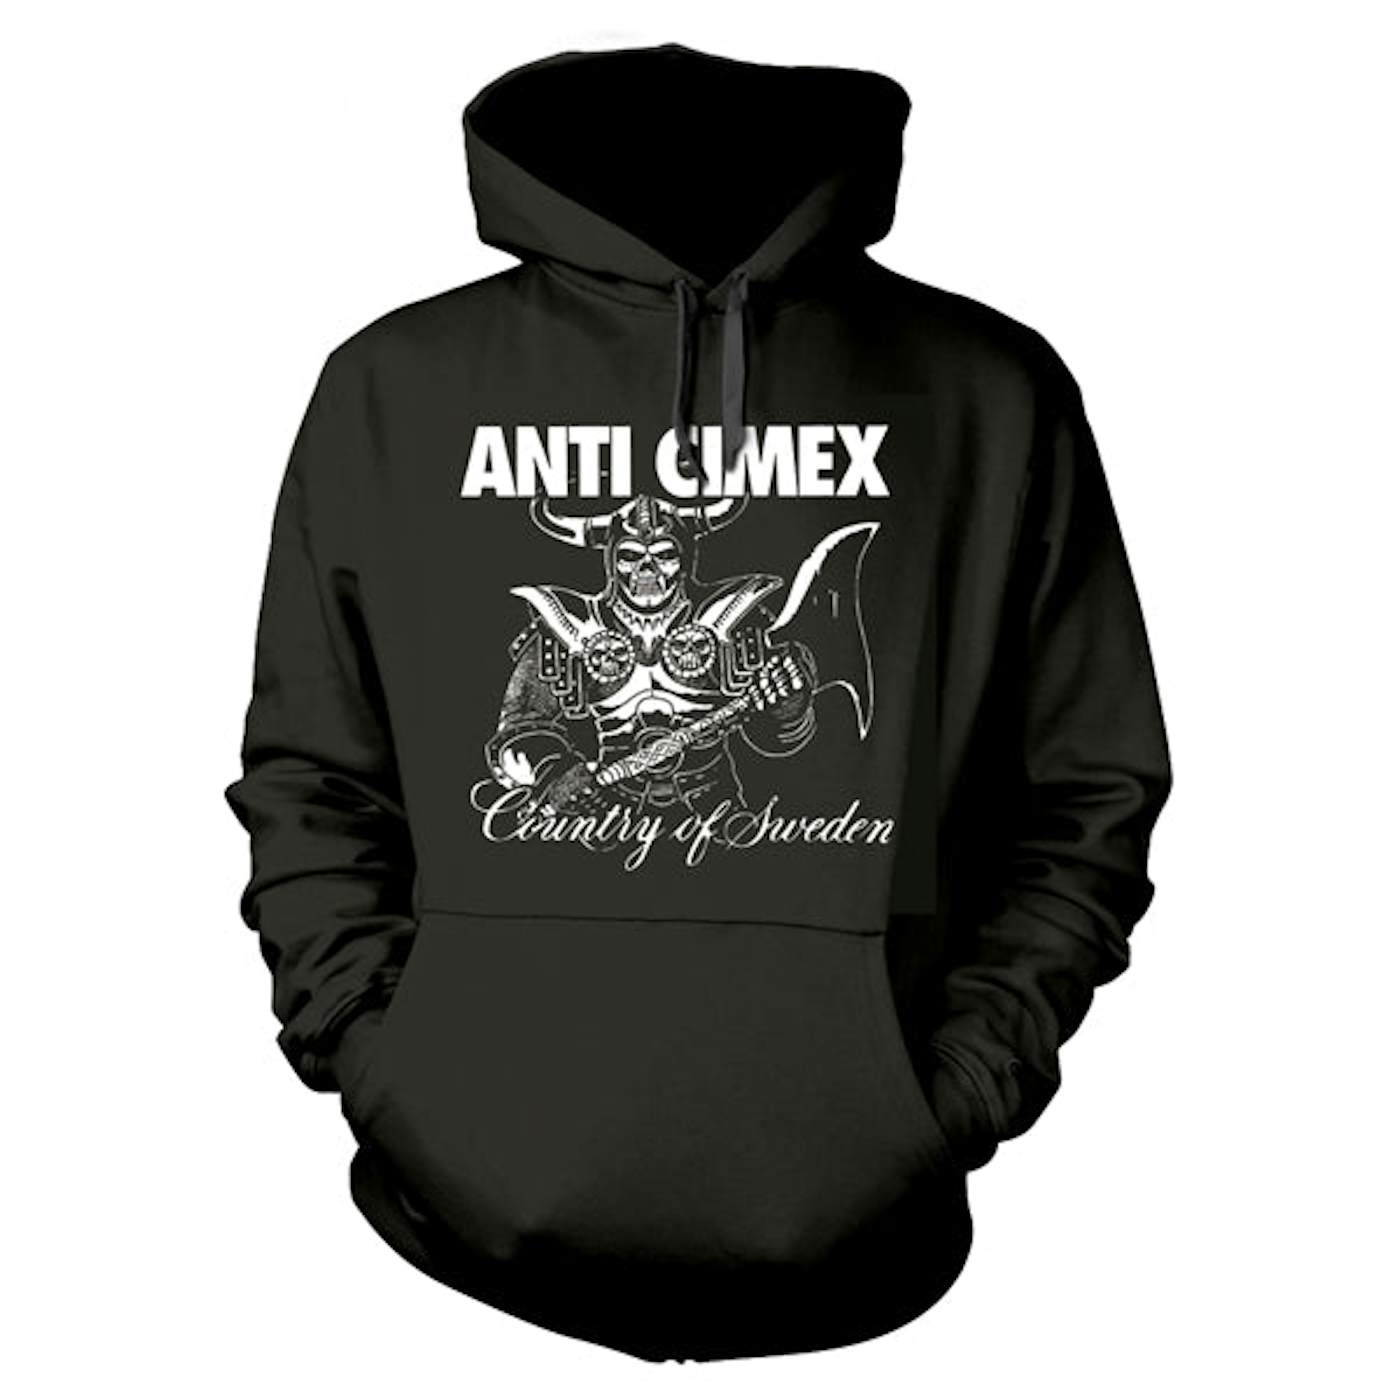 Anti Cimex Hoodie - Country Of Sweden